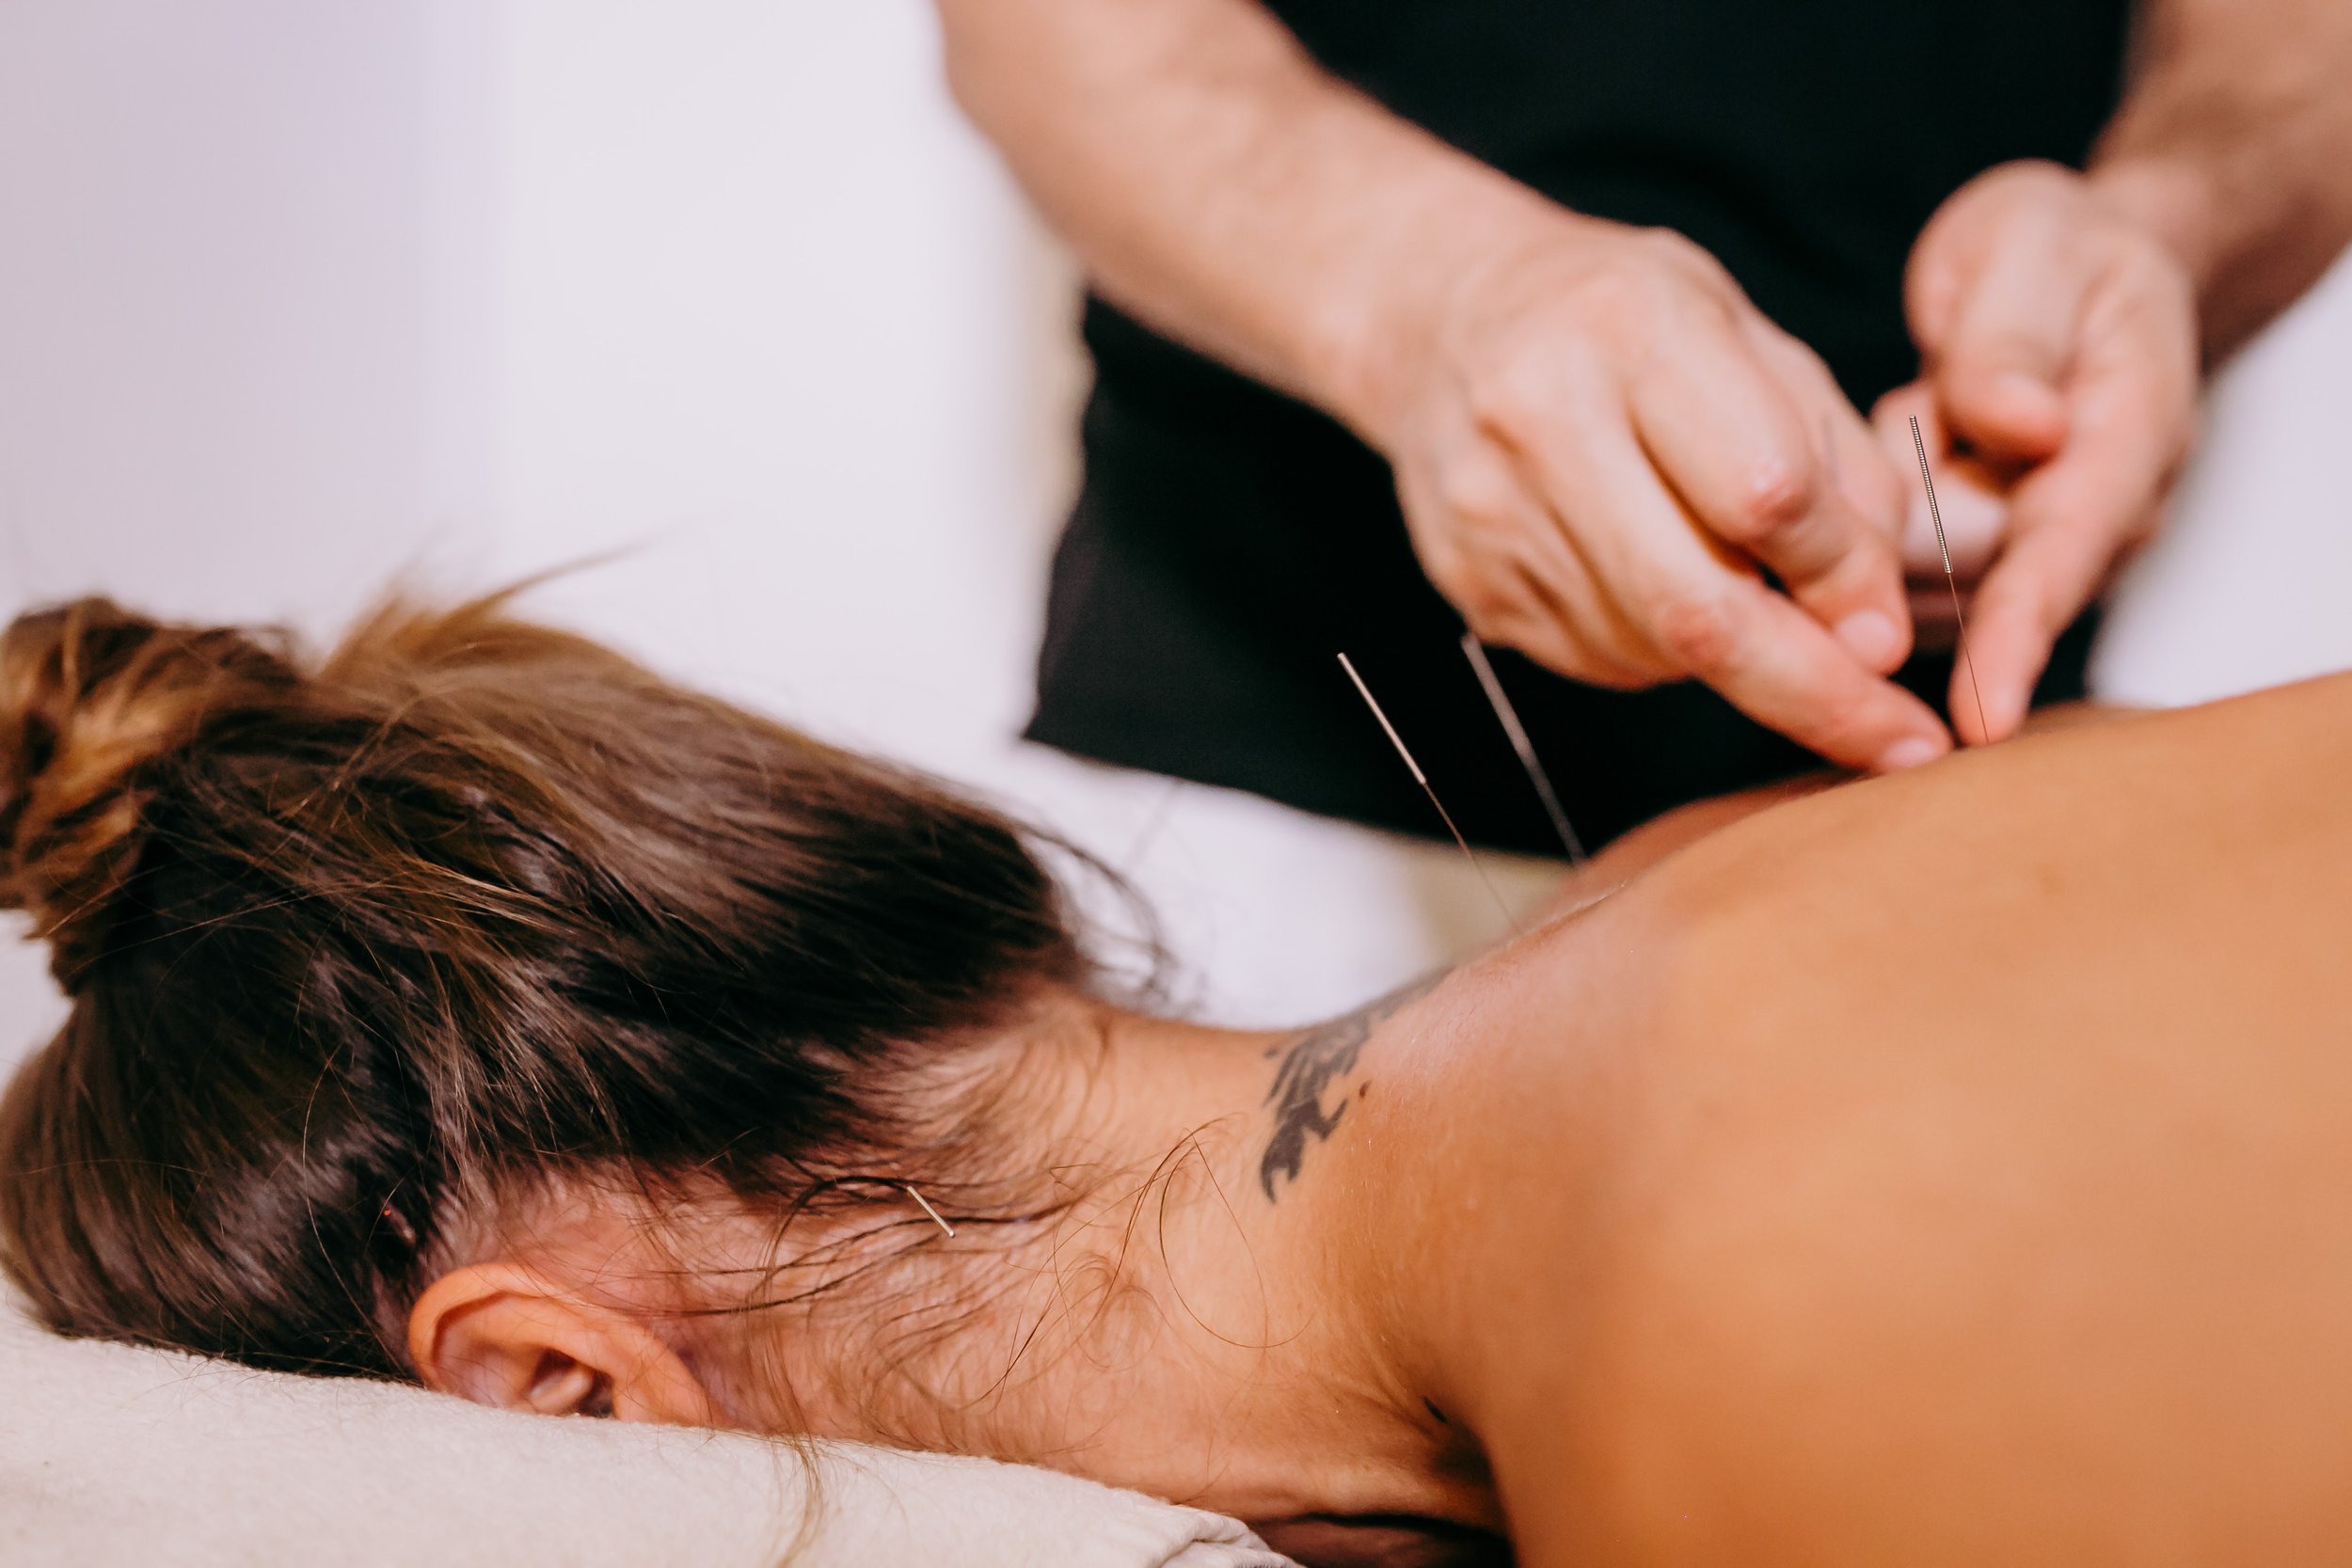 A woman facedown being treated with acupuncture. (Copy)